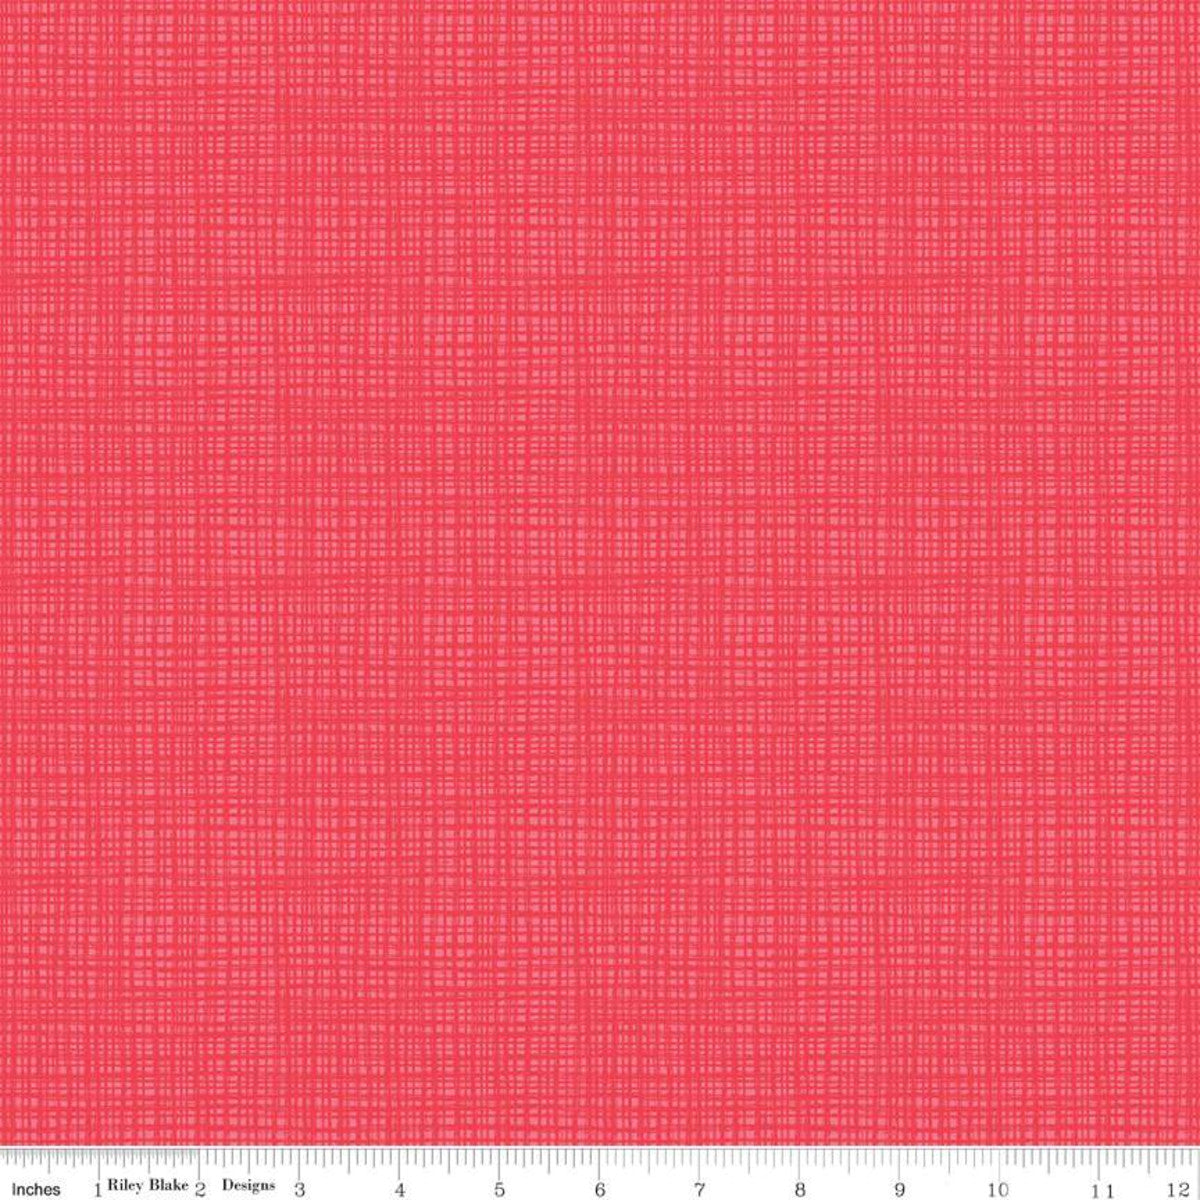 Quilting, Riley Blake, Sewing Texture Fabric, Texture Fabric, Quilting Fabric, Quilting cotton, Texture from Riley Blake, 100% Cotton, Sewing, Embroidery, Quilt Shop Fabric, Flamingo, Pink